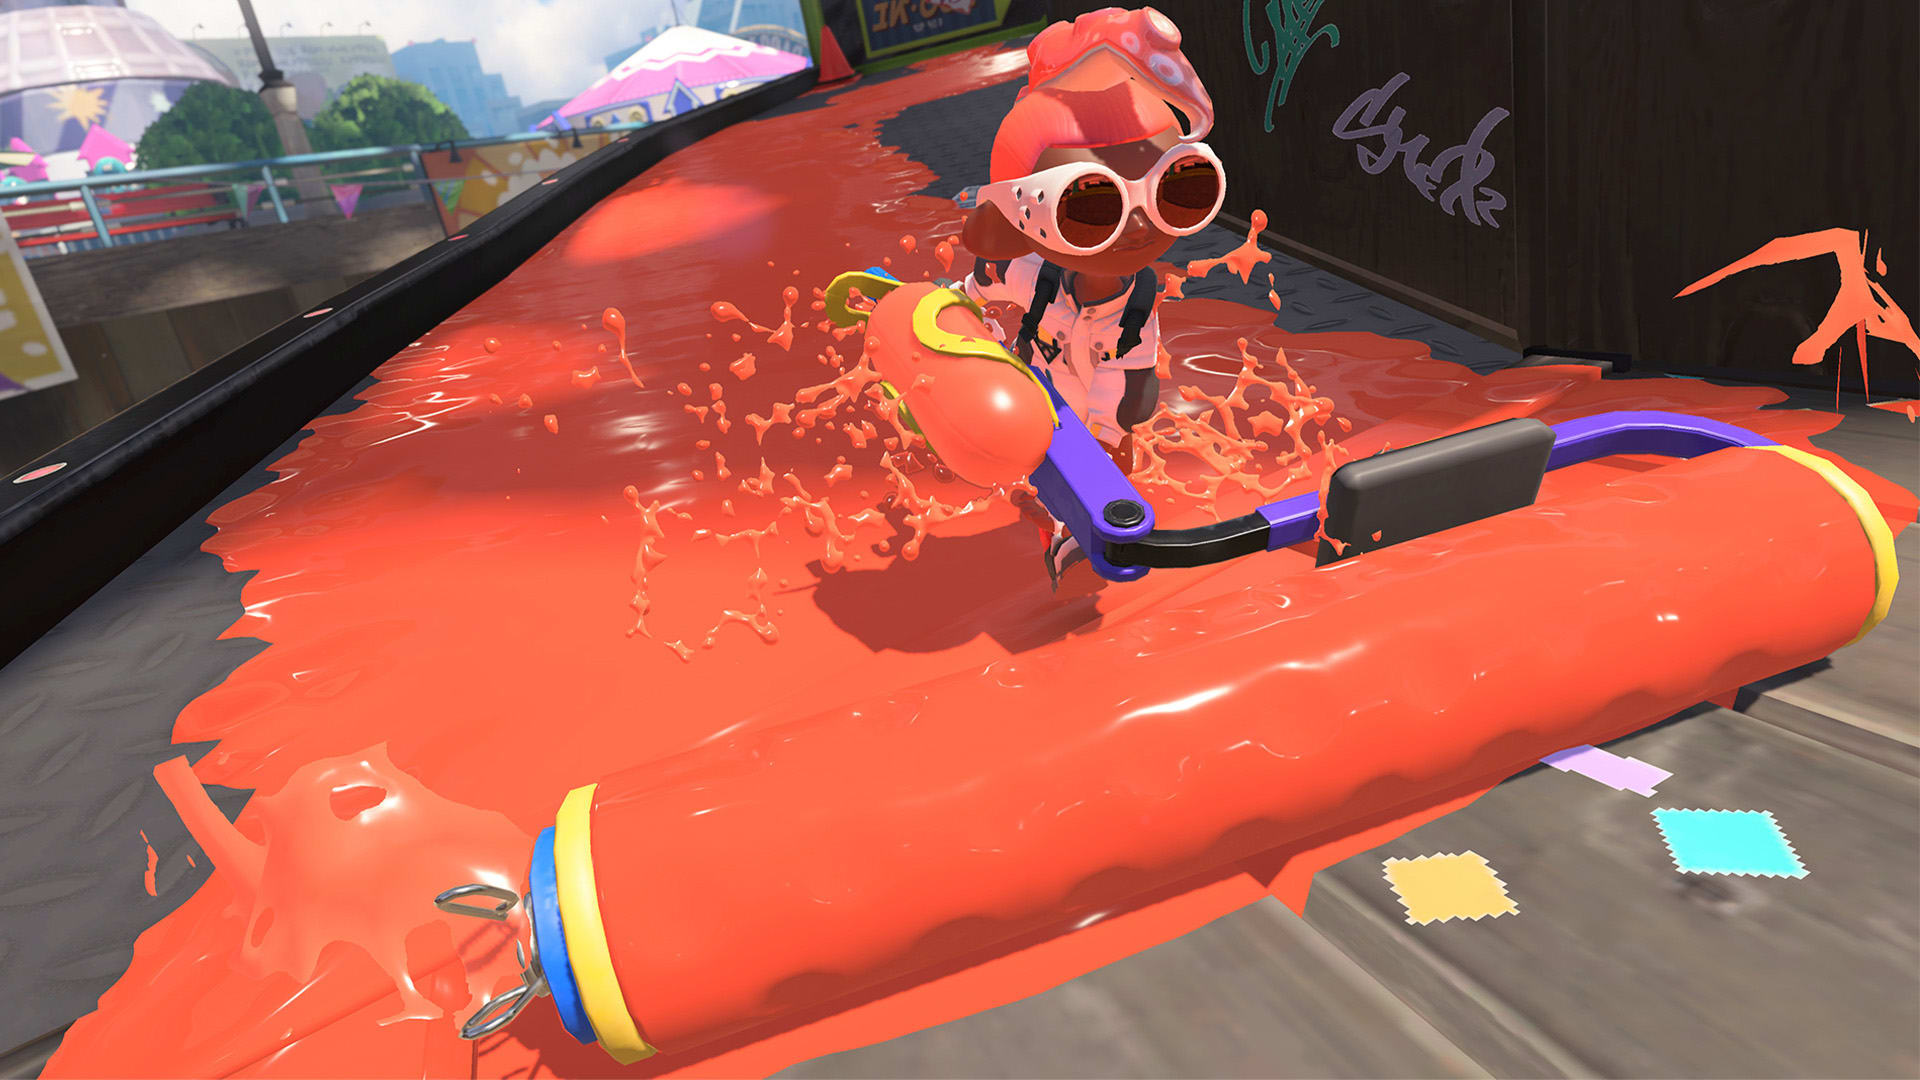 Catch up on what Splatoon 3 has to offer Screenshot 1